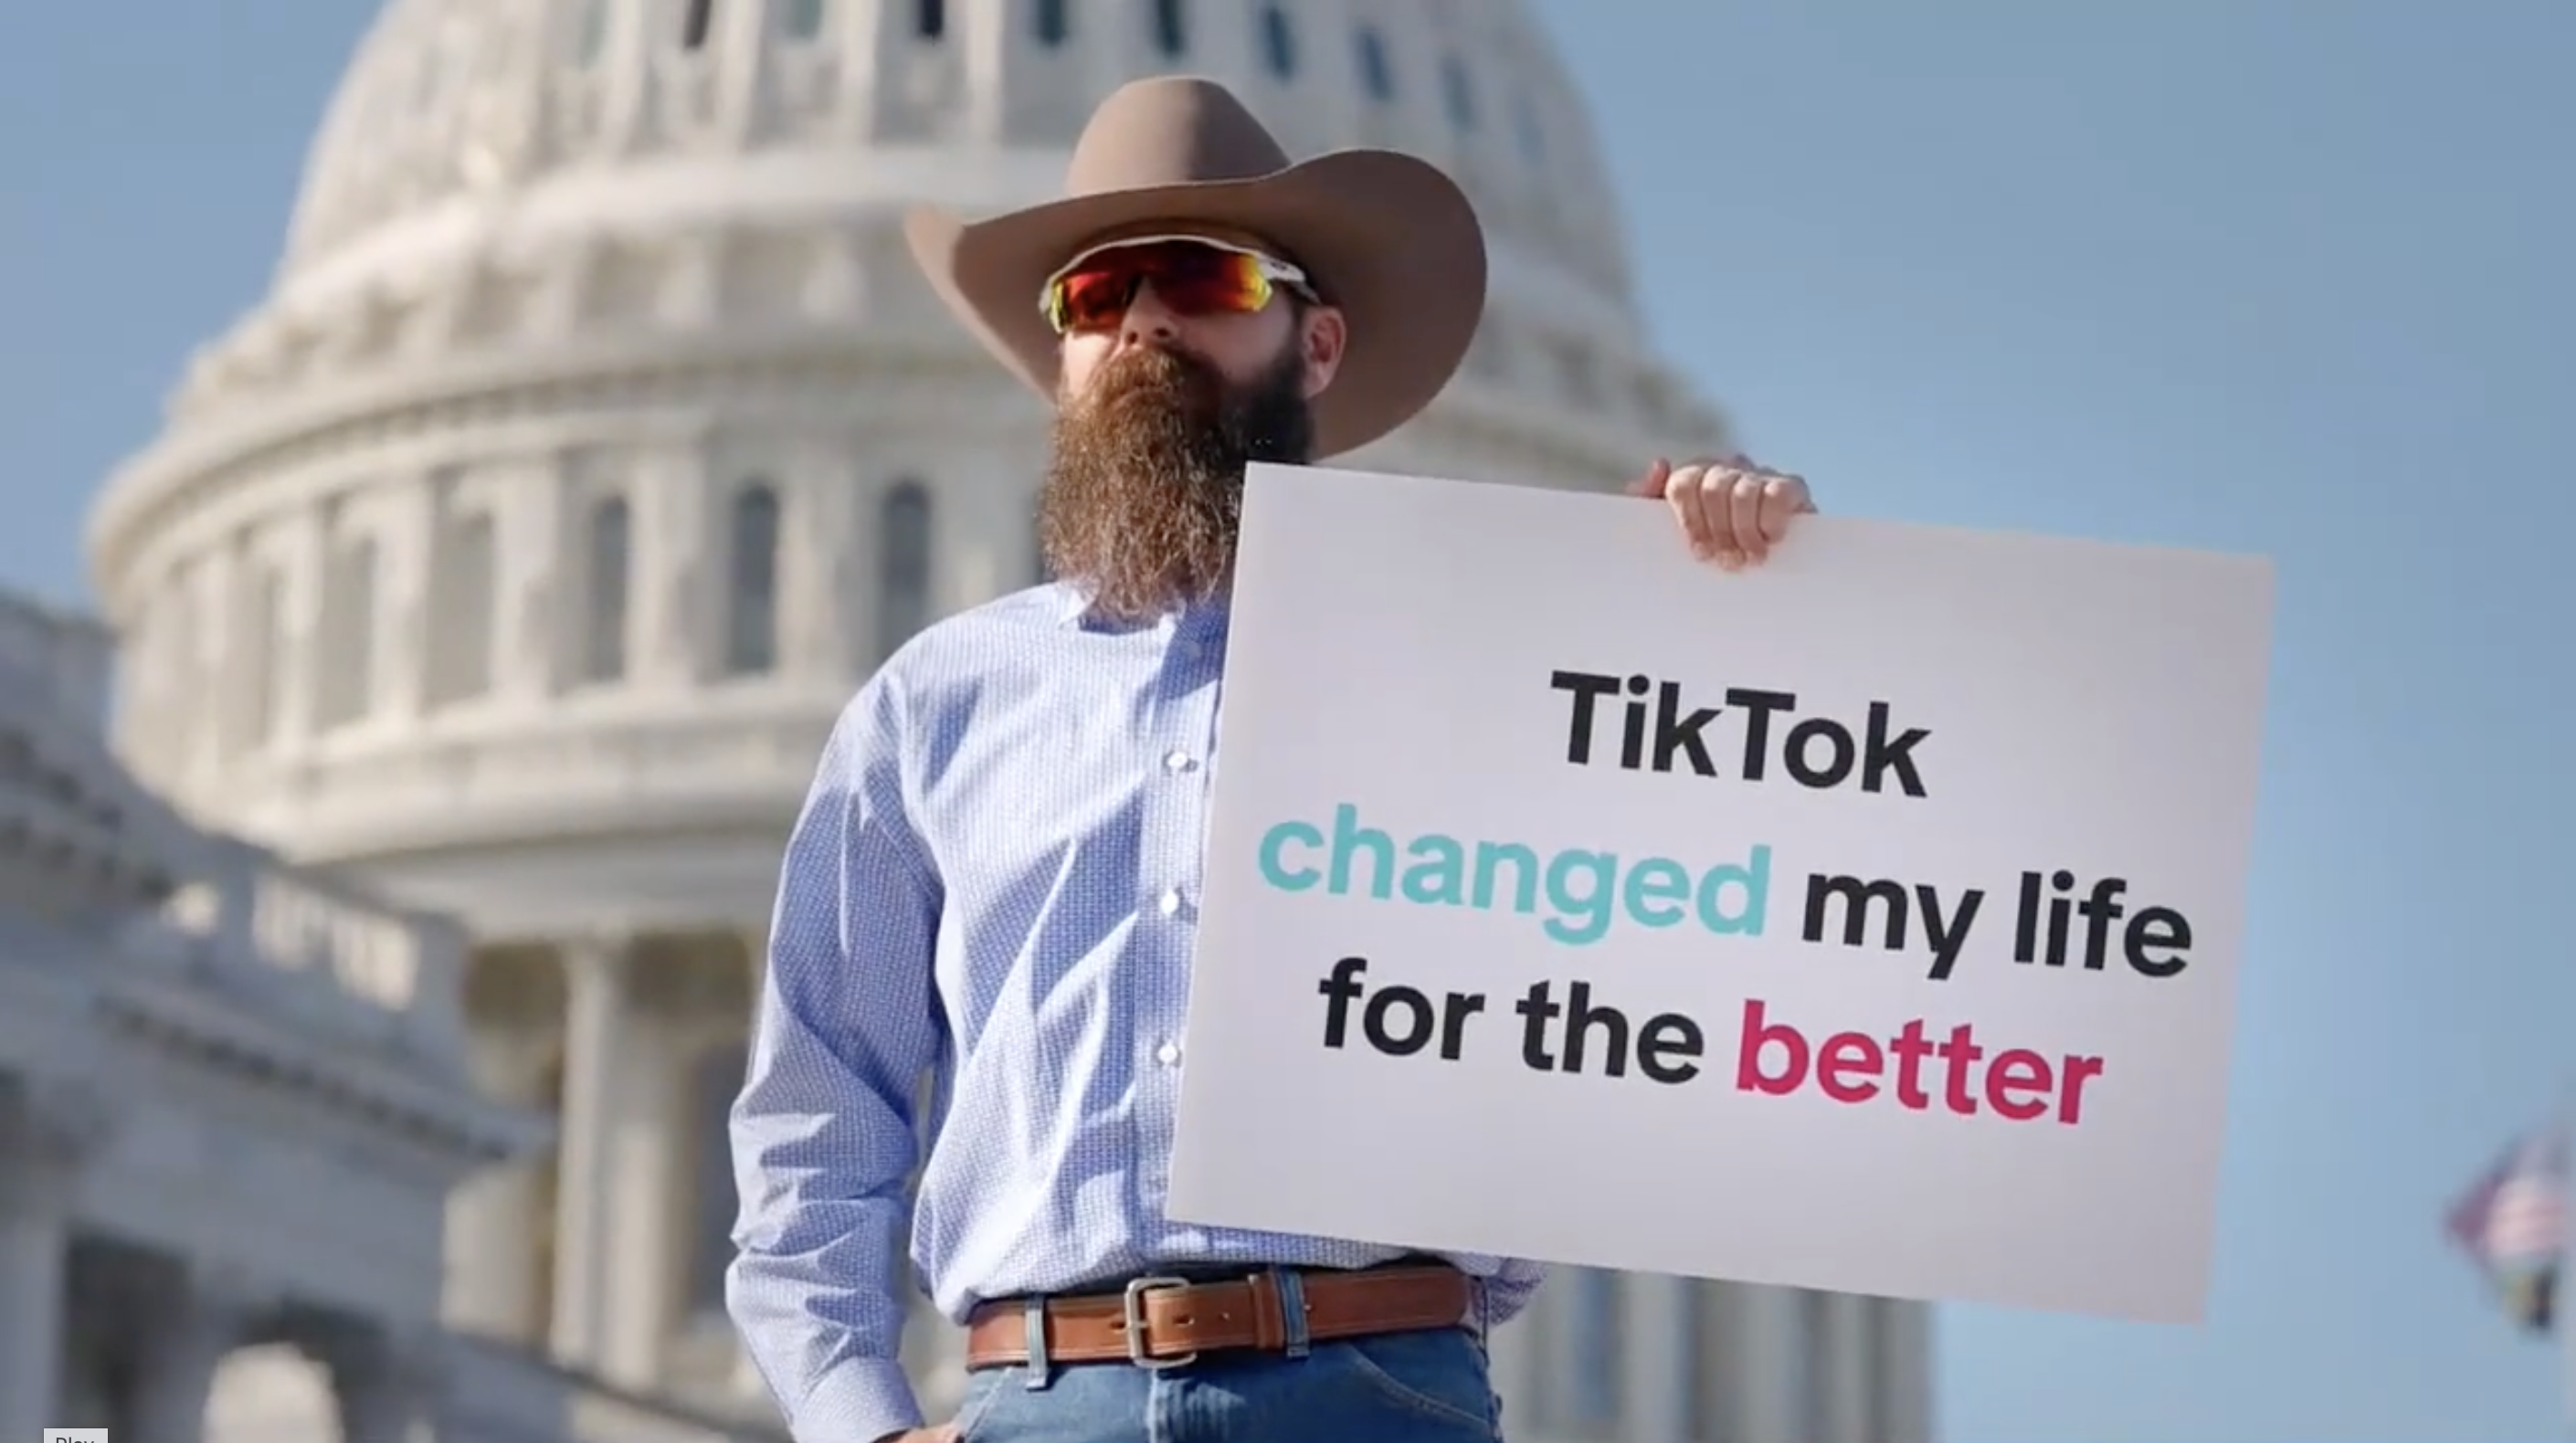 Tiktok's first linear TV ad features small business owners